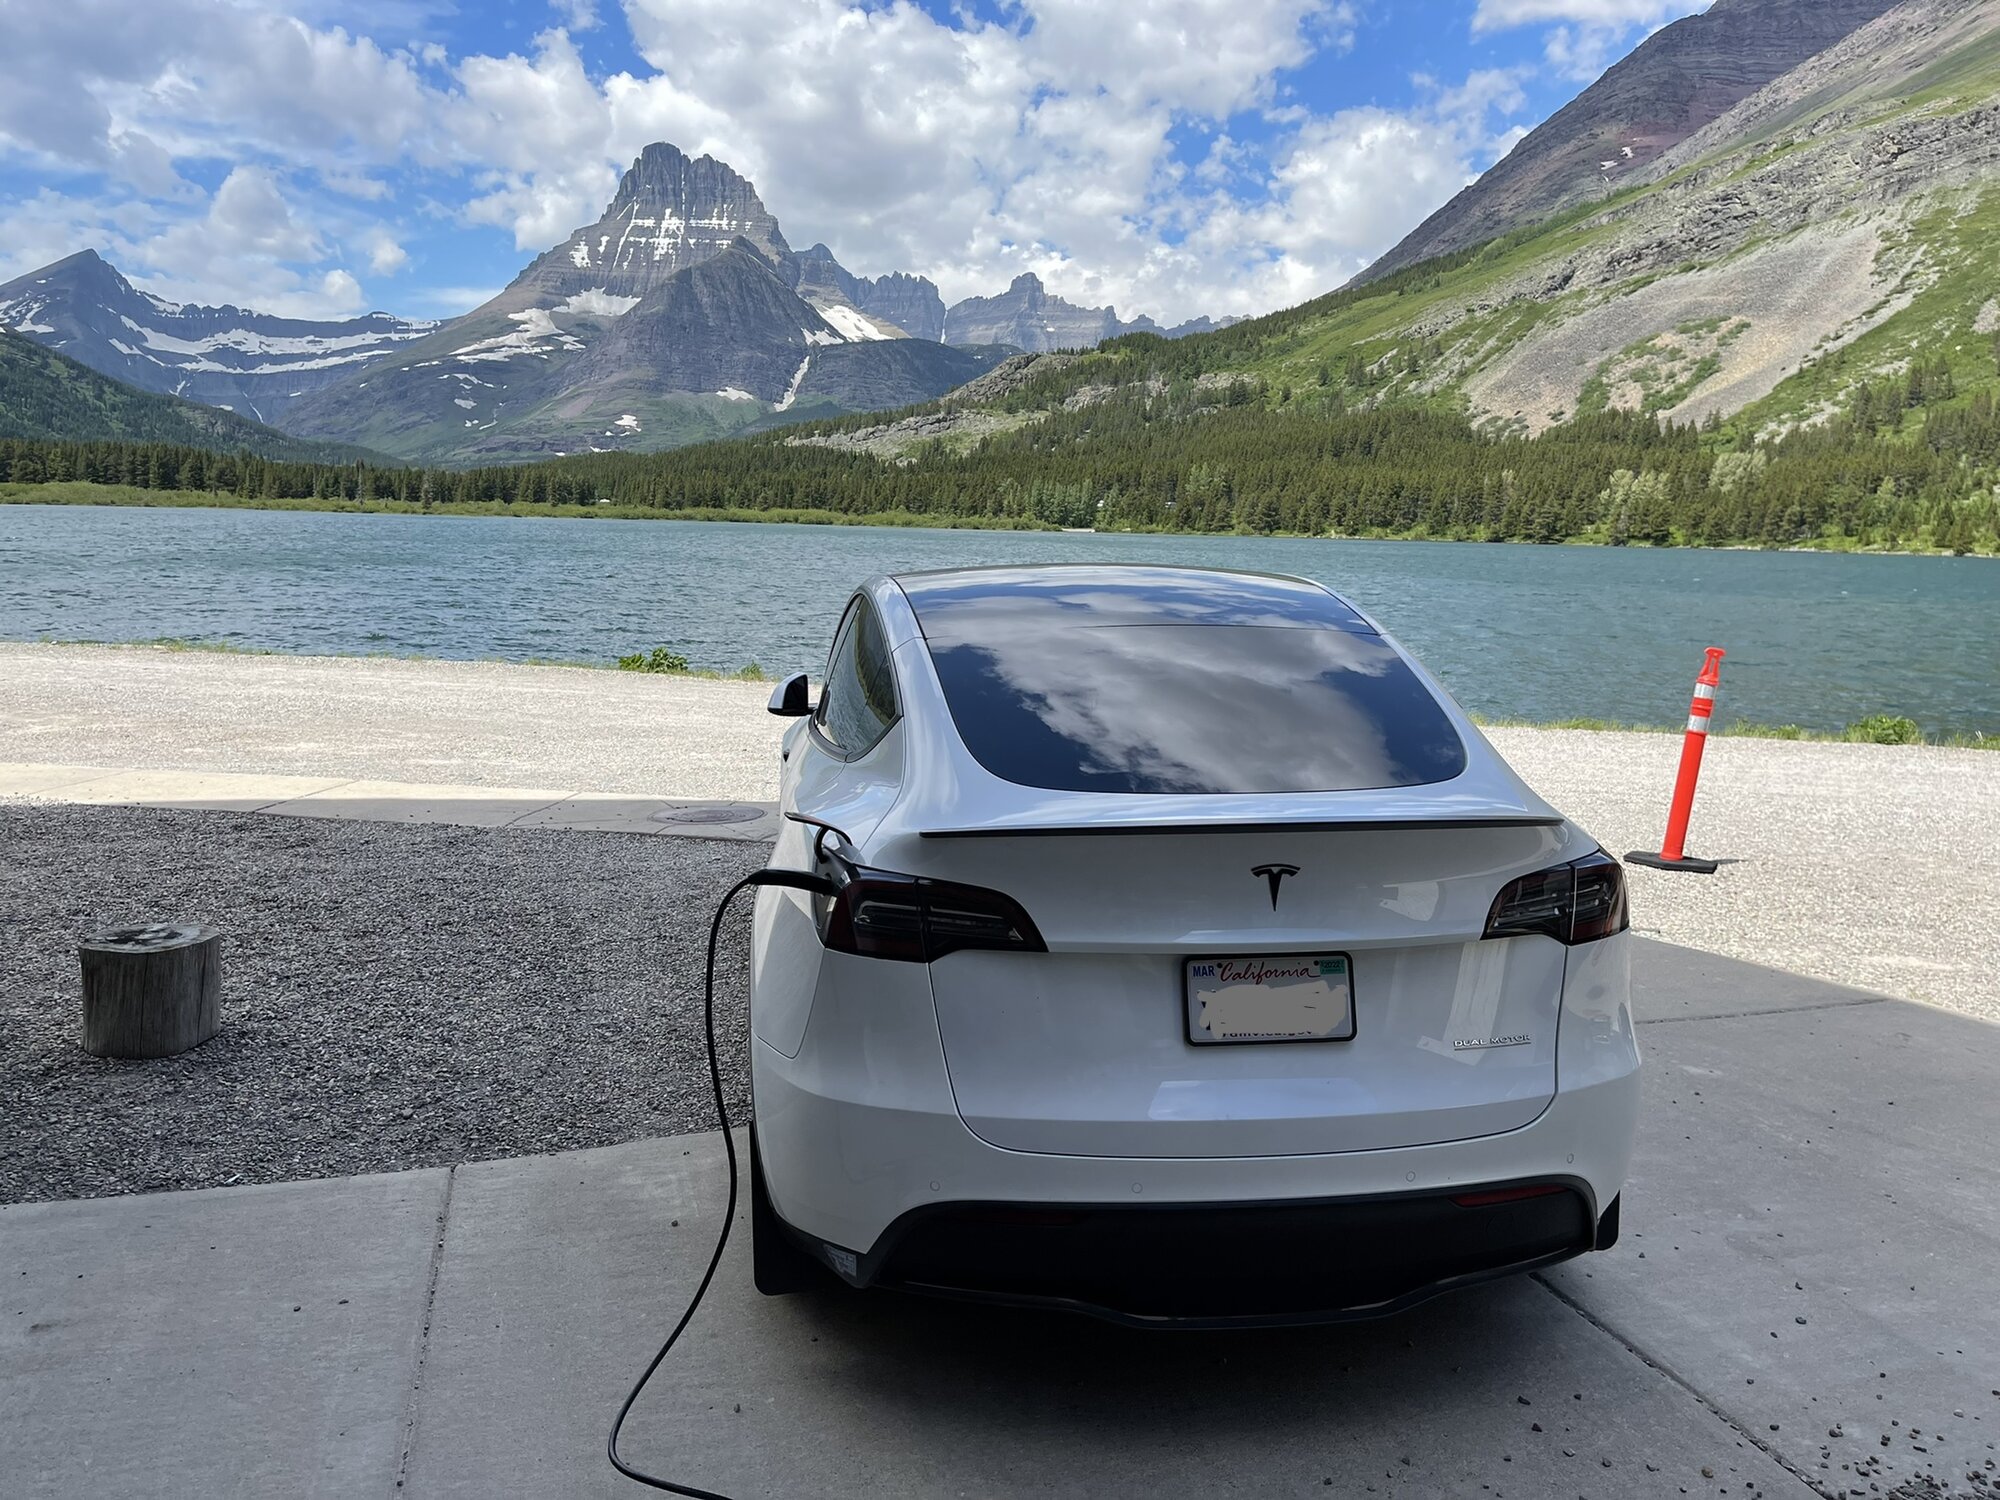 Model Y Road Trip Experience pt 2 - Crater Lake and Glacier